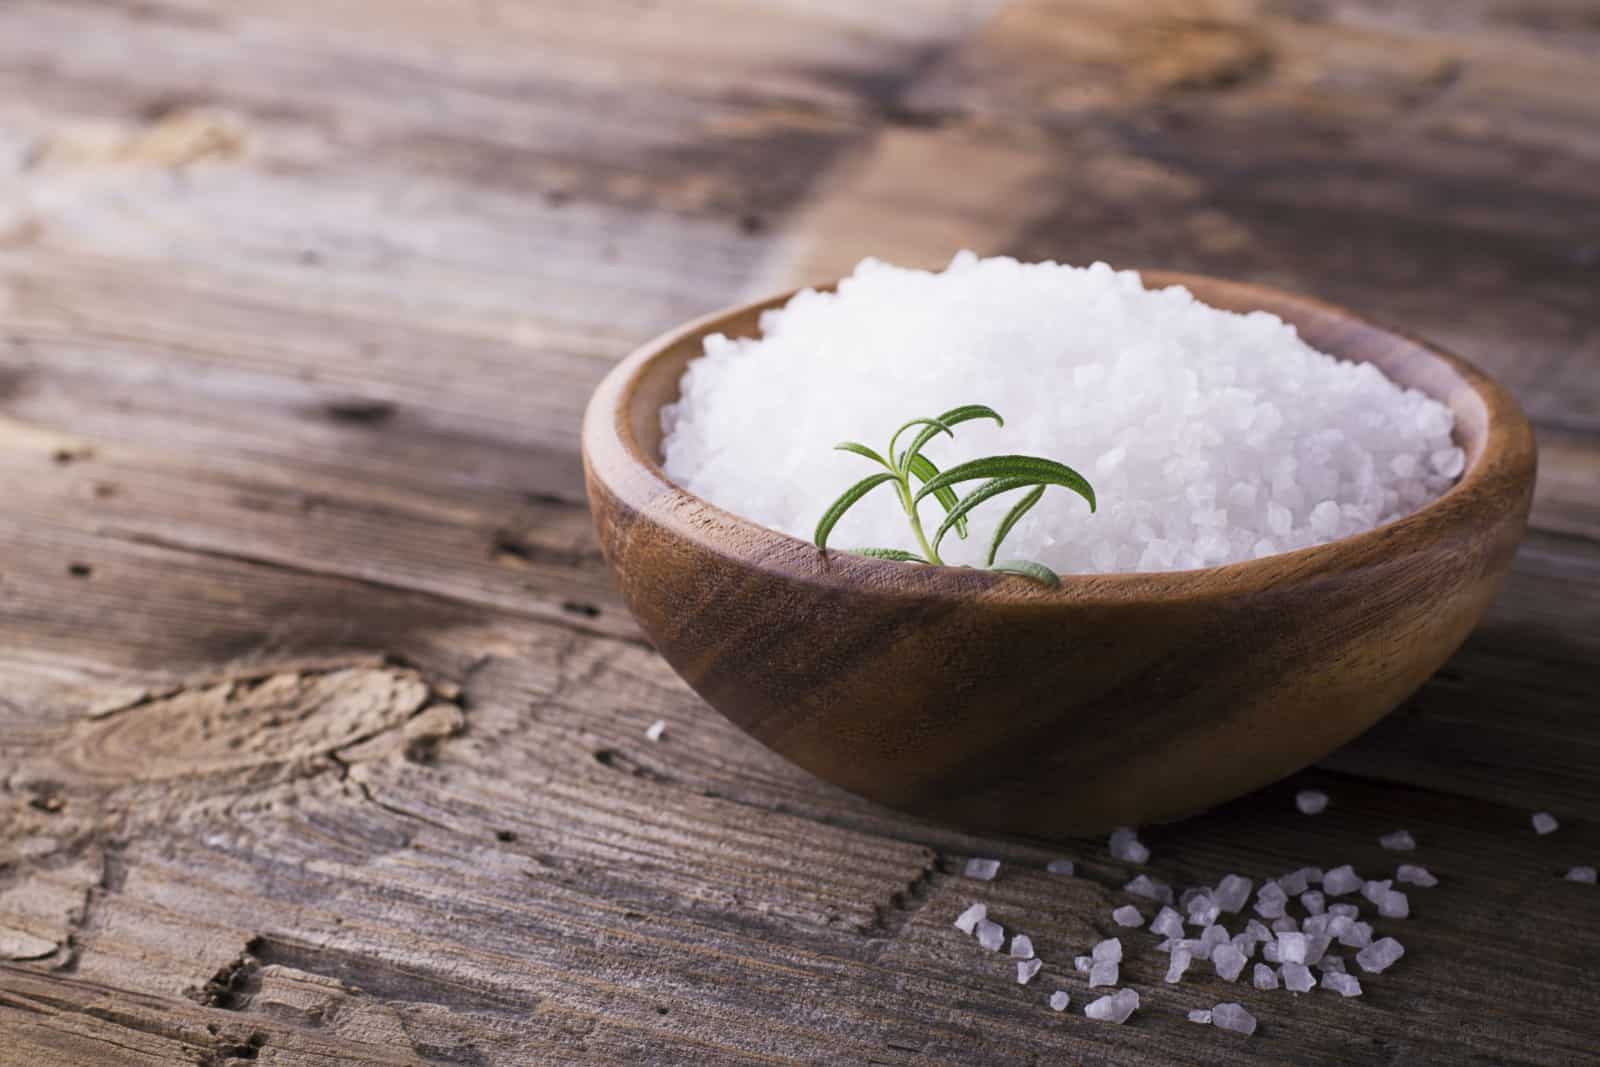 Large White sea salt in a natural wooden bowl with a sprig of fresh rosemary